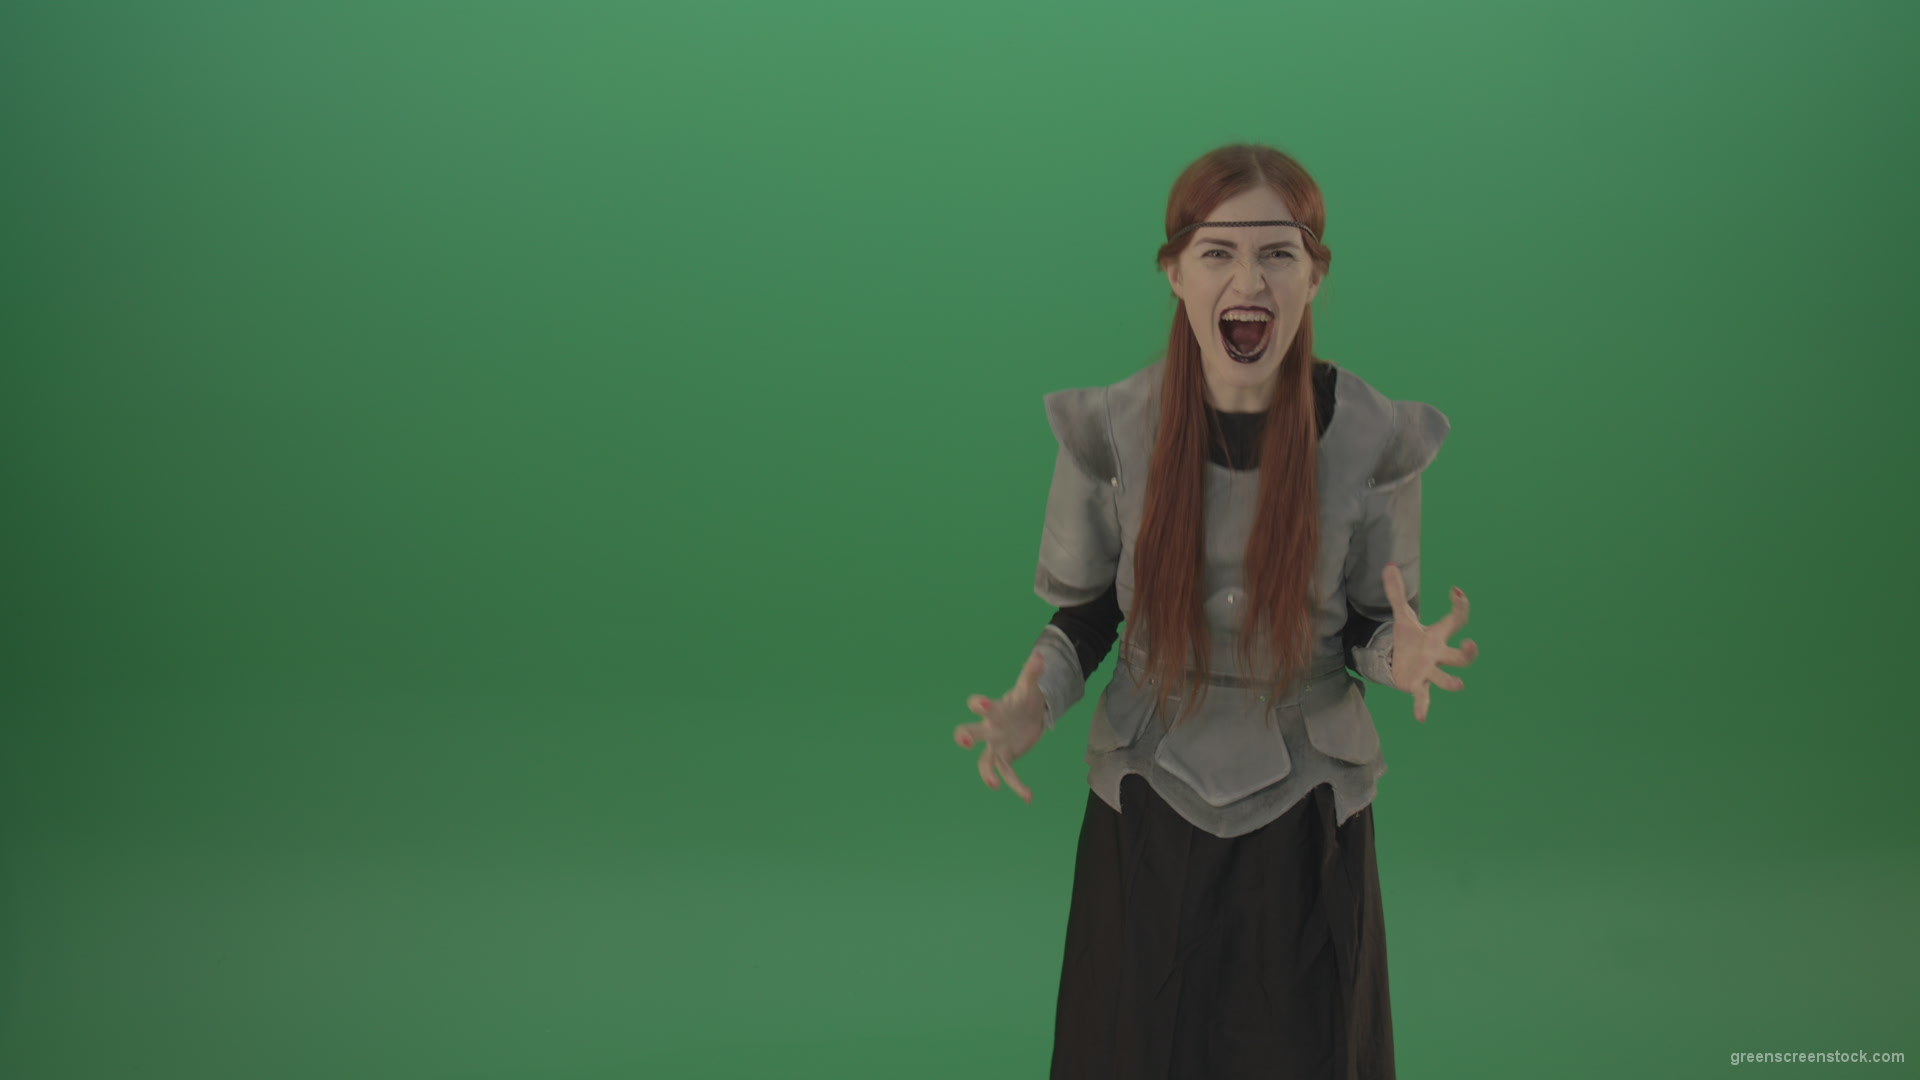 Witch-girl-watched-and-screamed-at-the-camera-with-green-eyes-on-a-green-background_007 Green Screen Stock